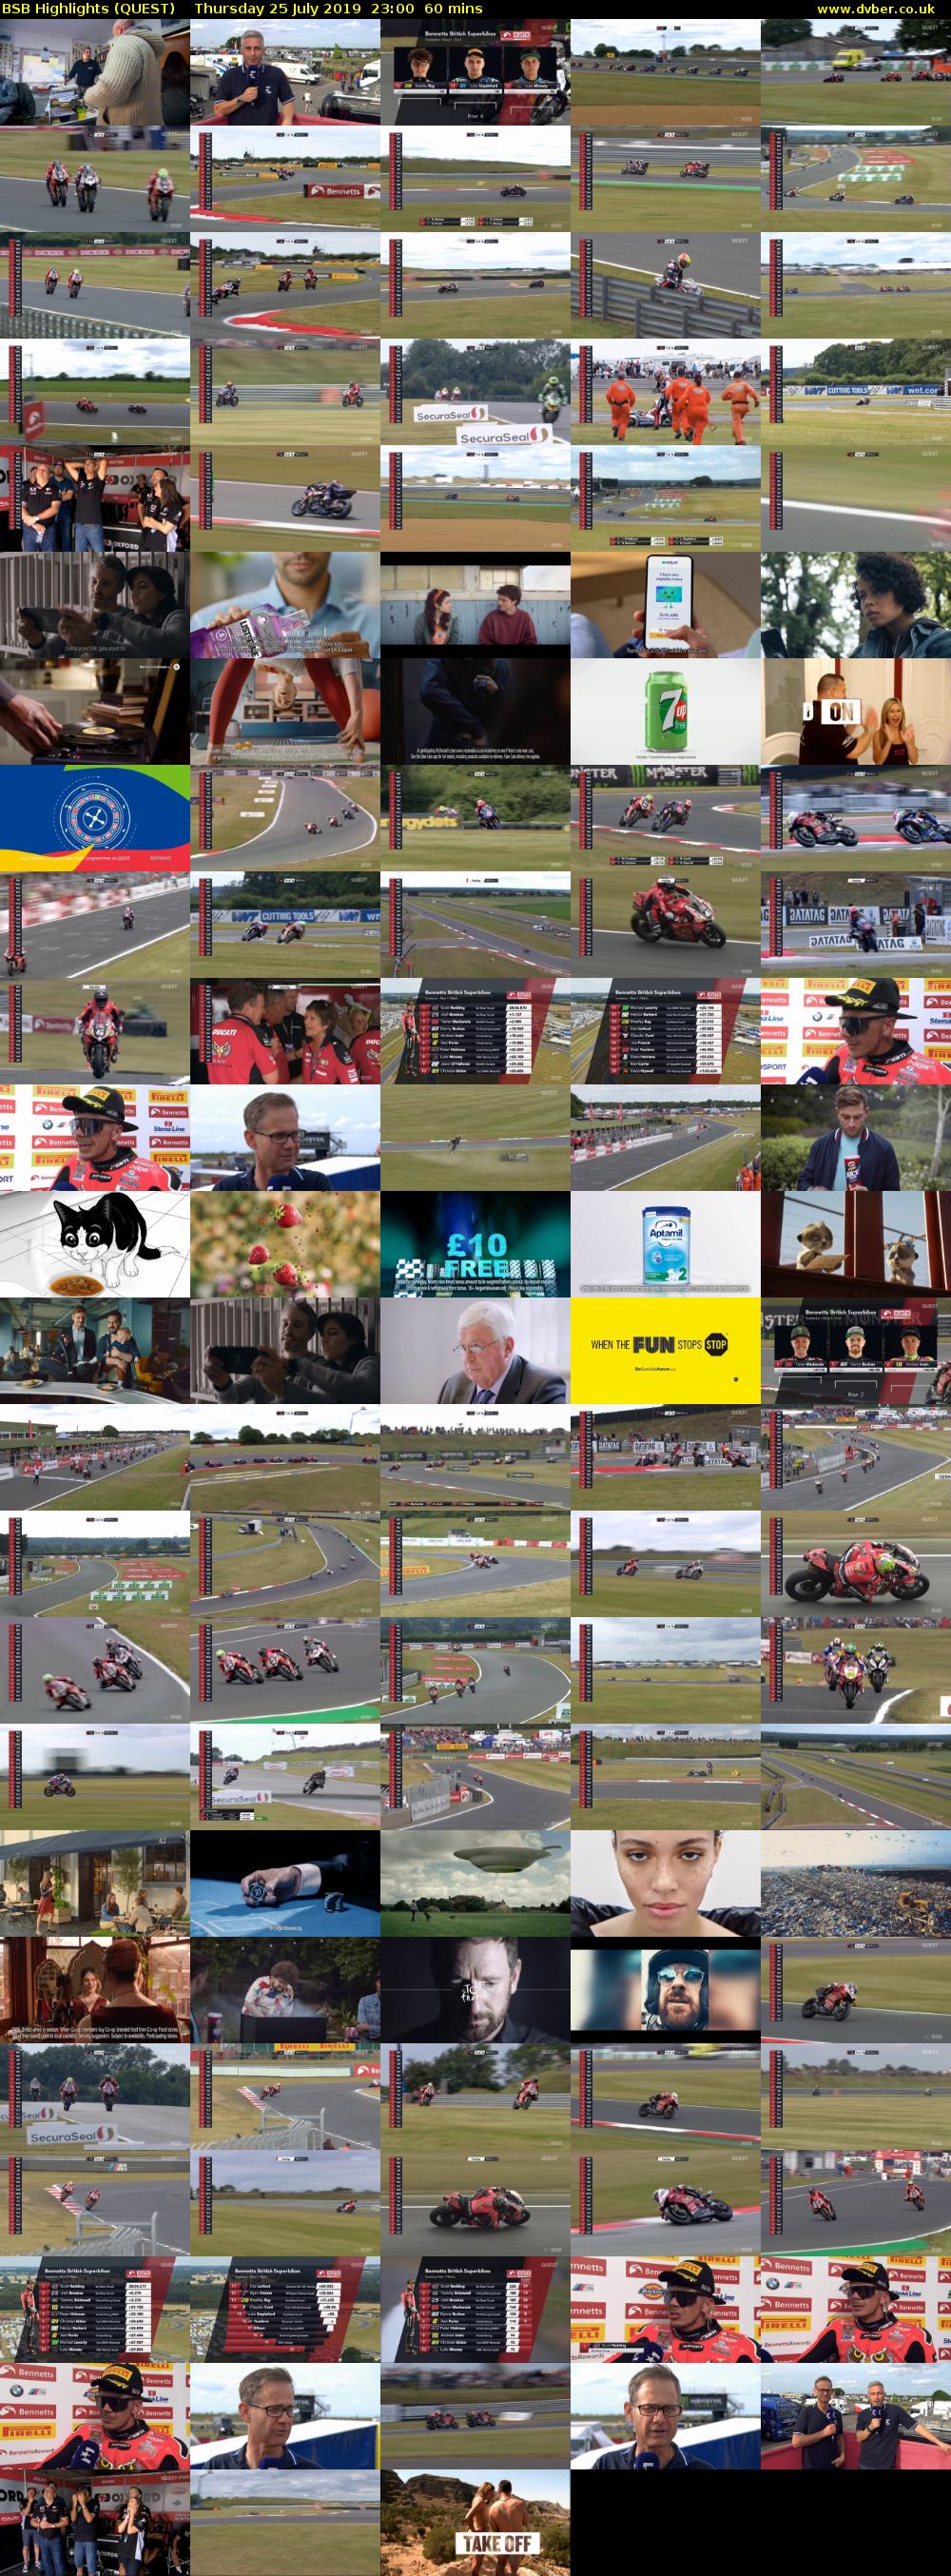 BSB Highlights (QUEST) Thursday 25 July 2019 23:00 - 00:00